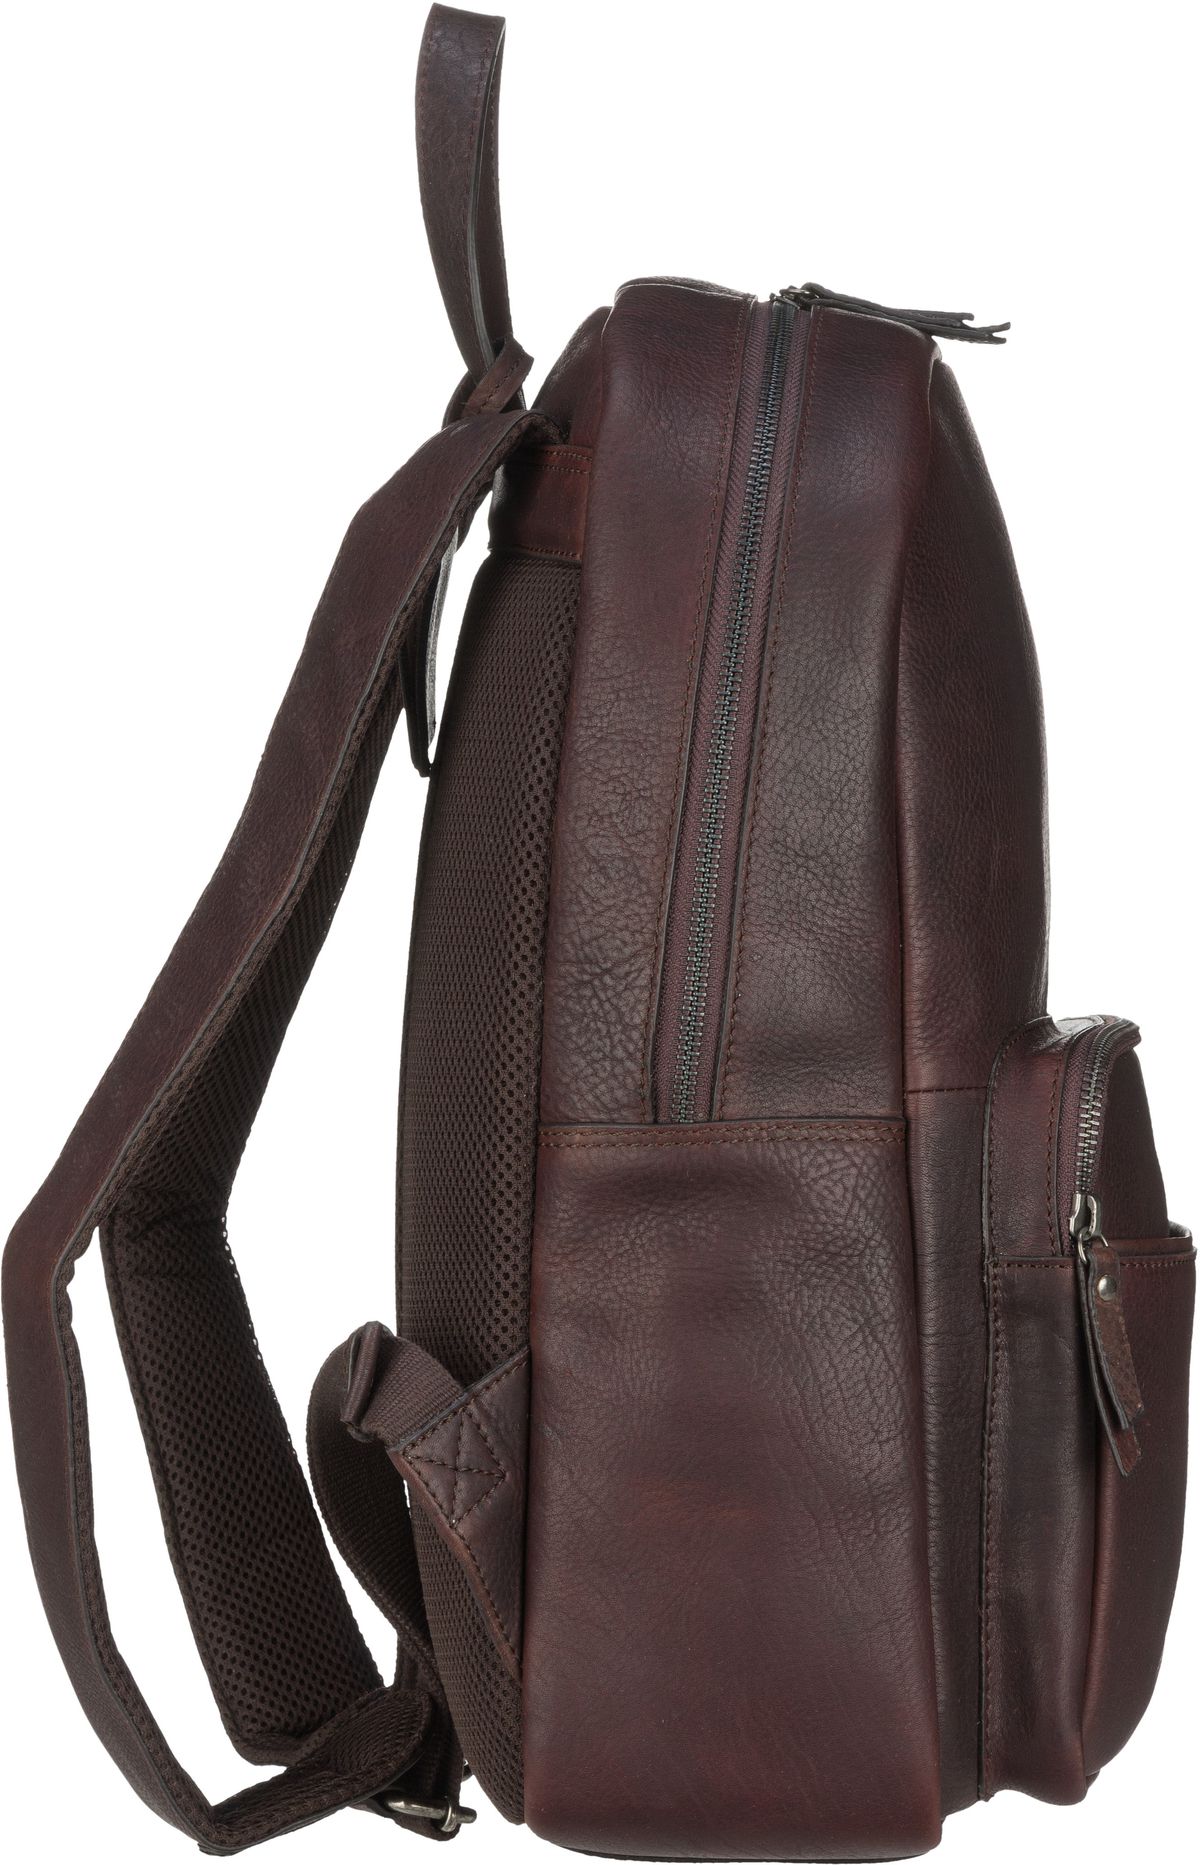 Burkely Antique Avery Backpack 7002 - Brown